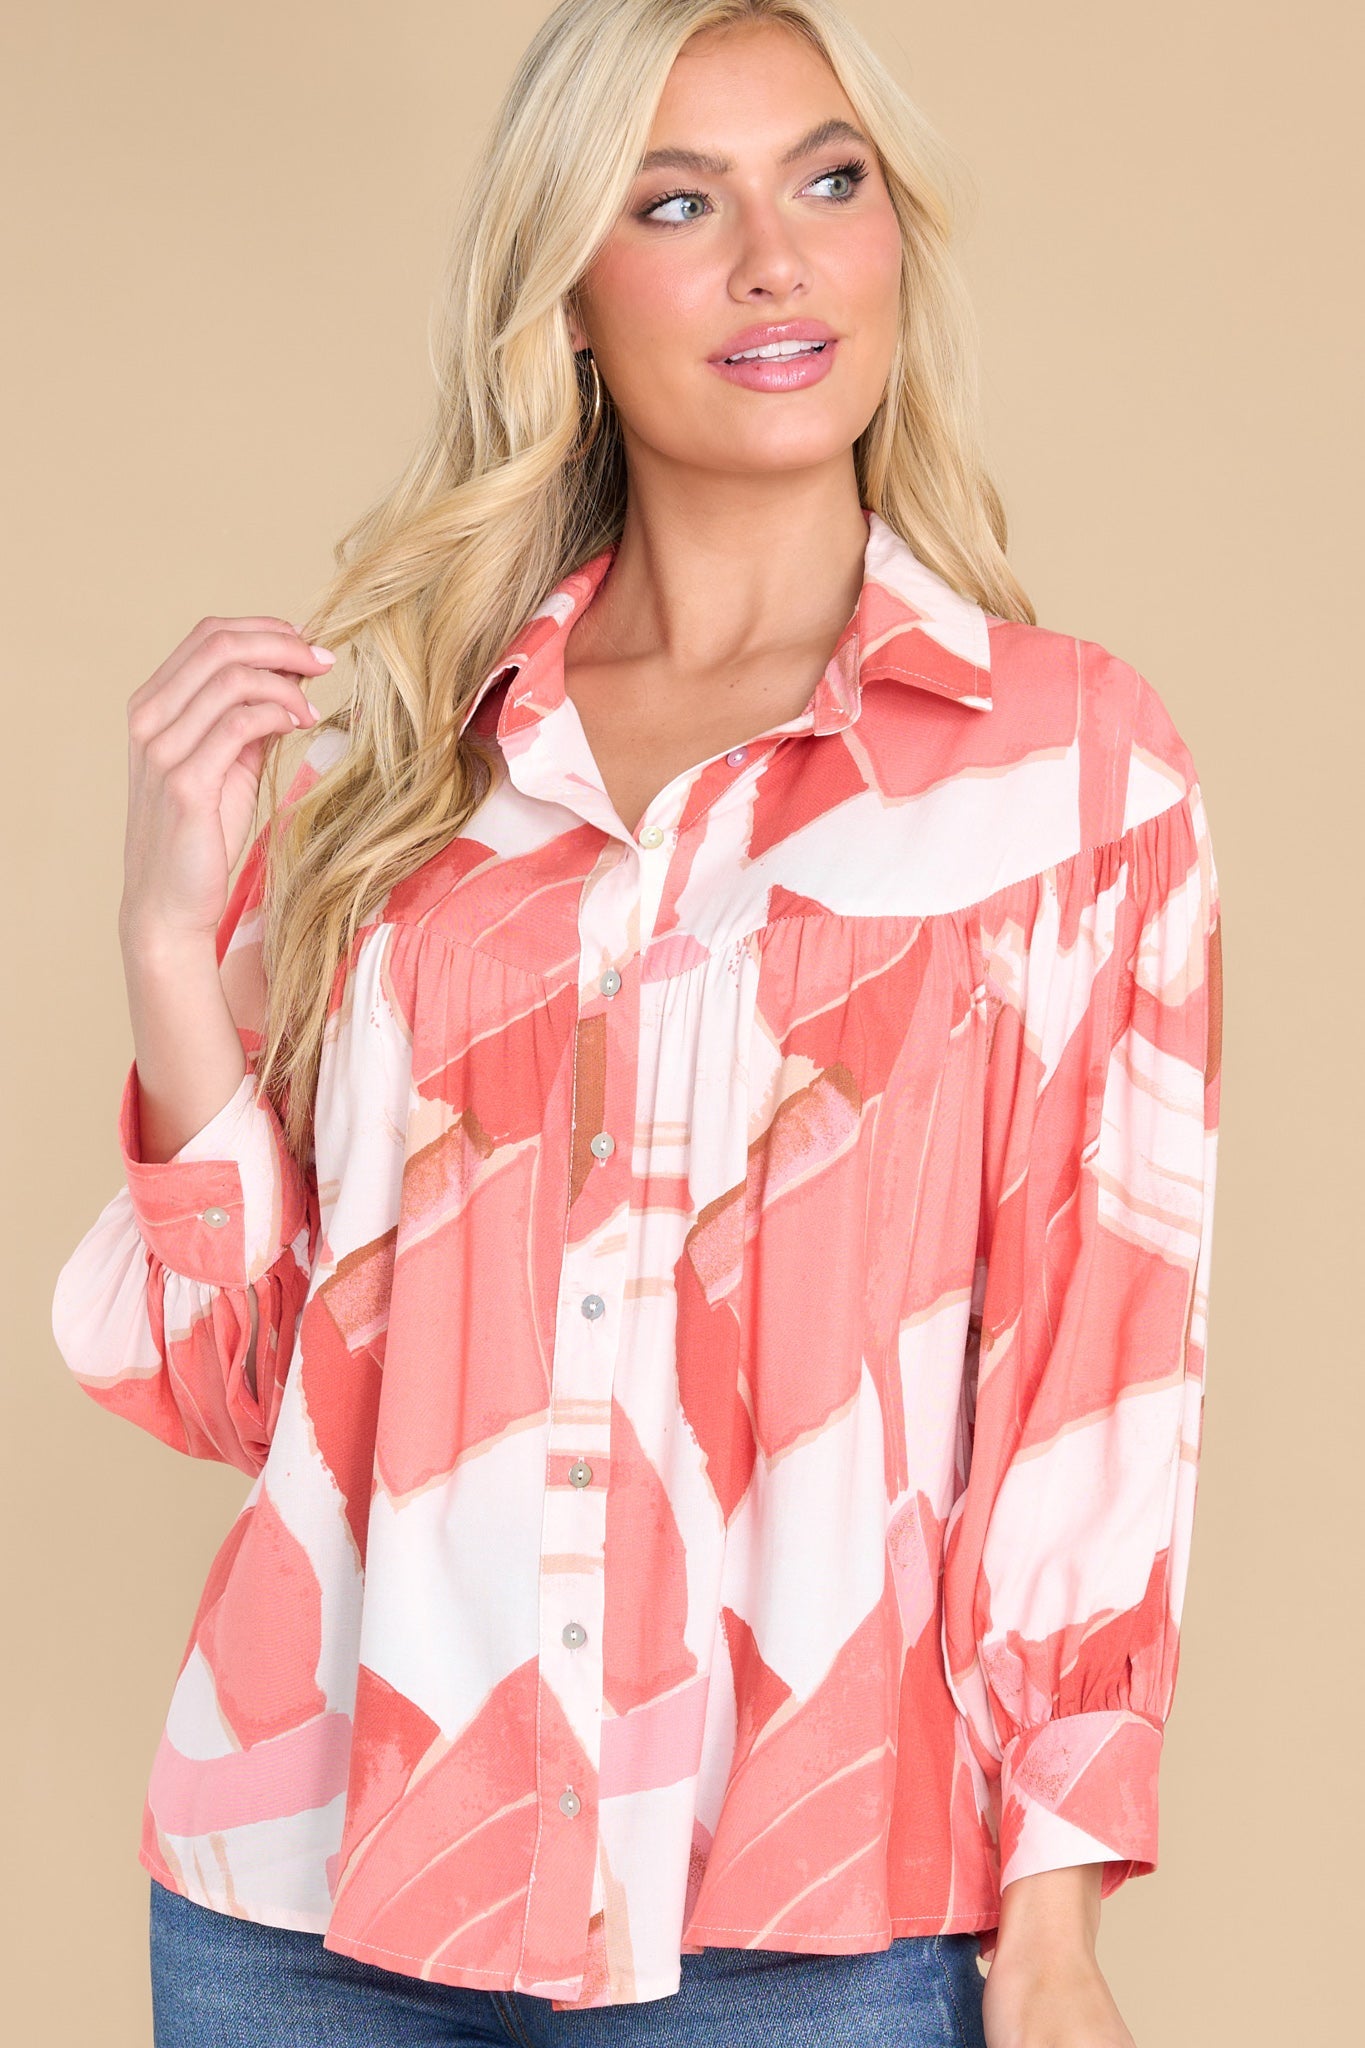 Give Me Your Attention Coral Multi Print Top - Red Dress